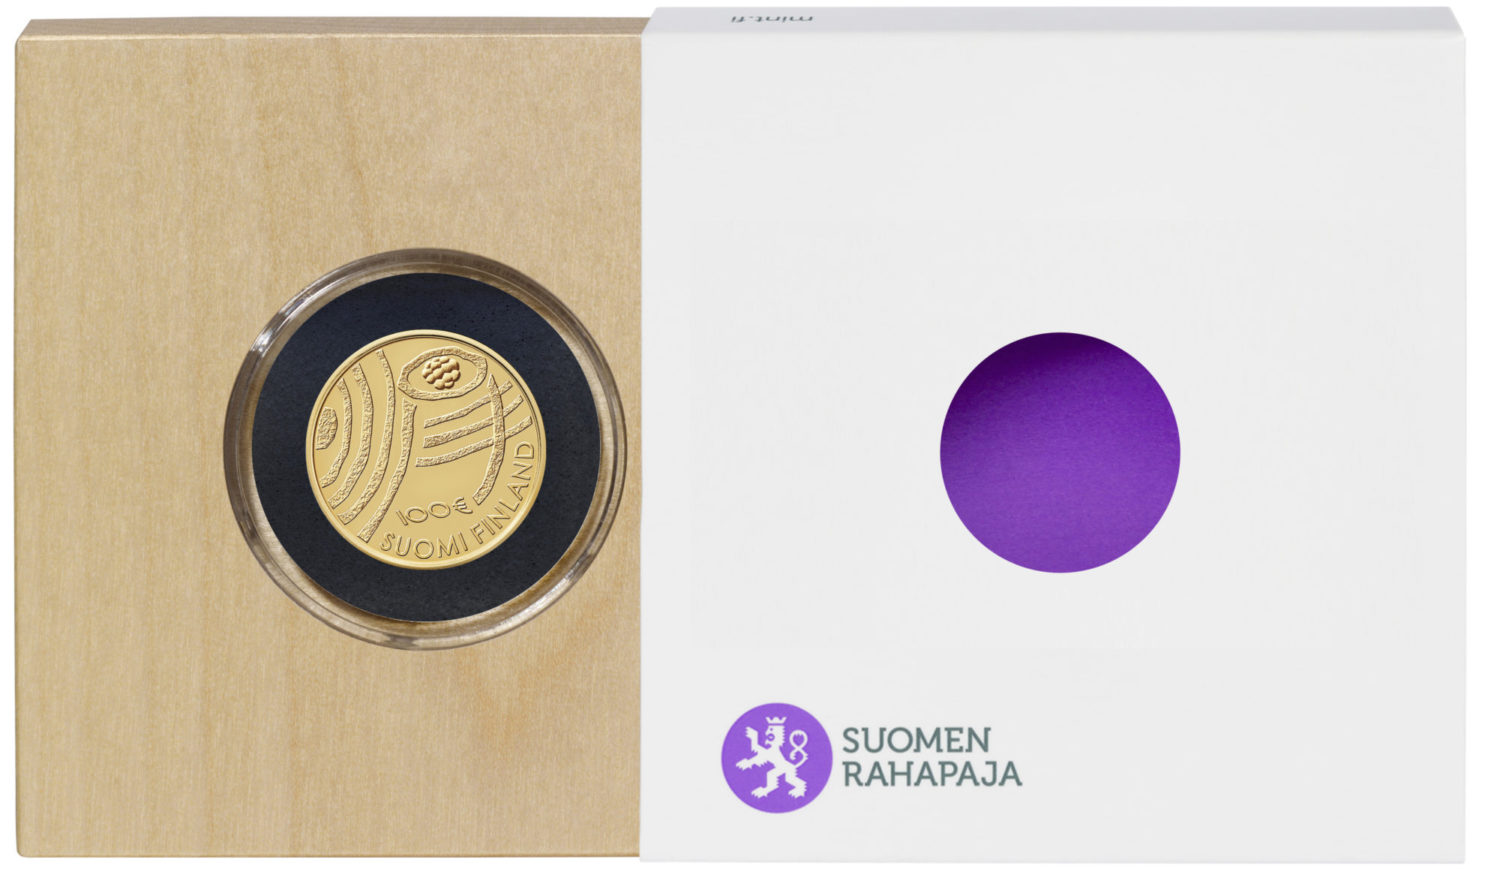 FINLAND 2018 €100 gold coin – Finland in 100 Years